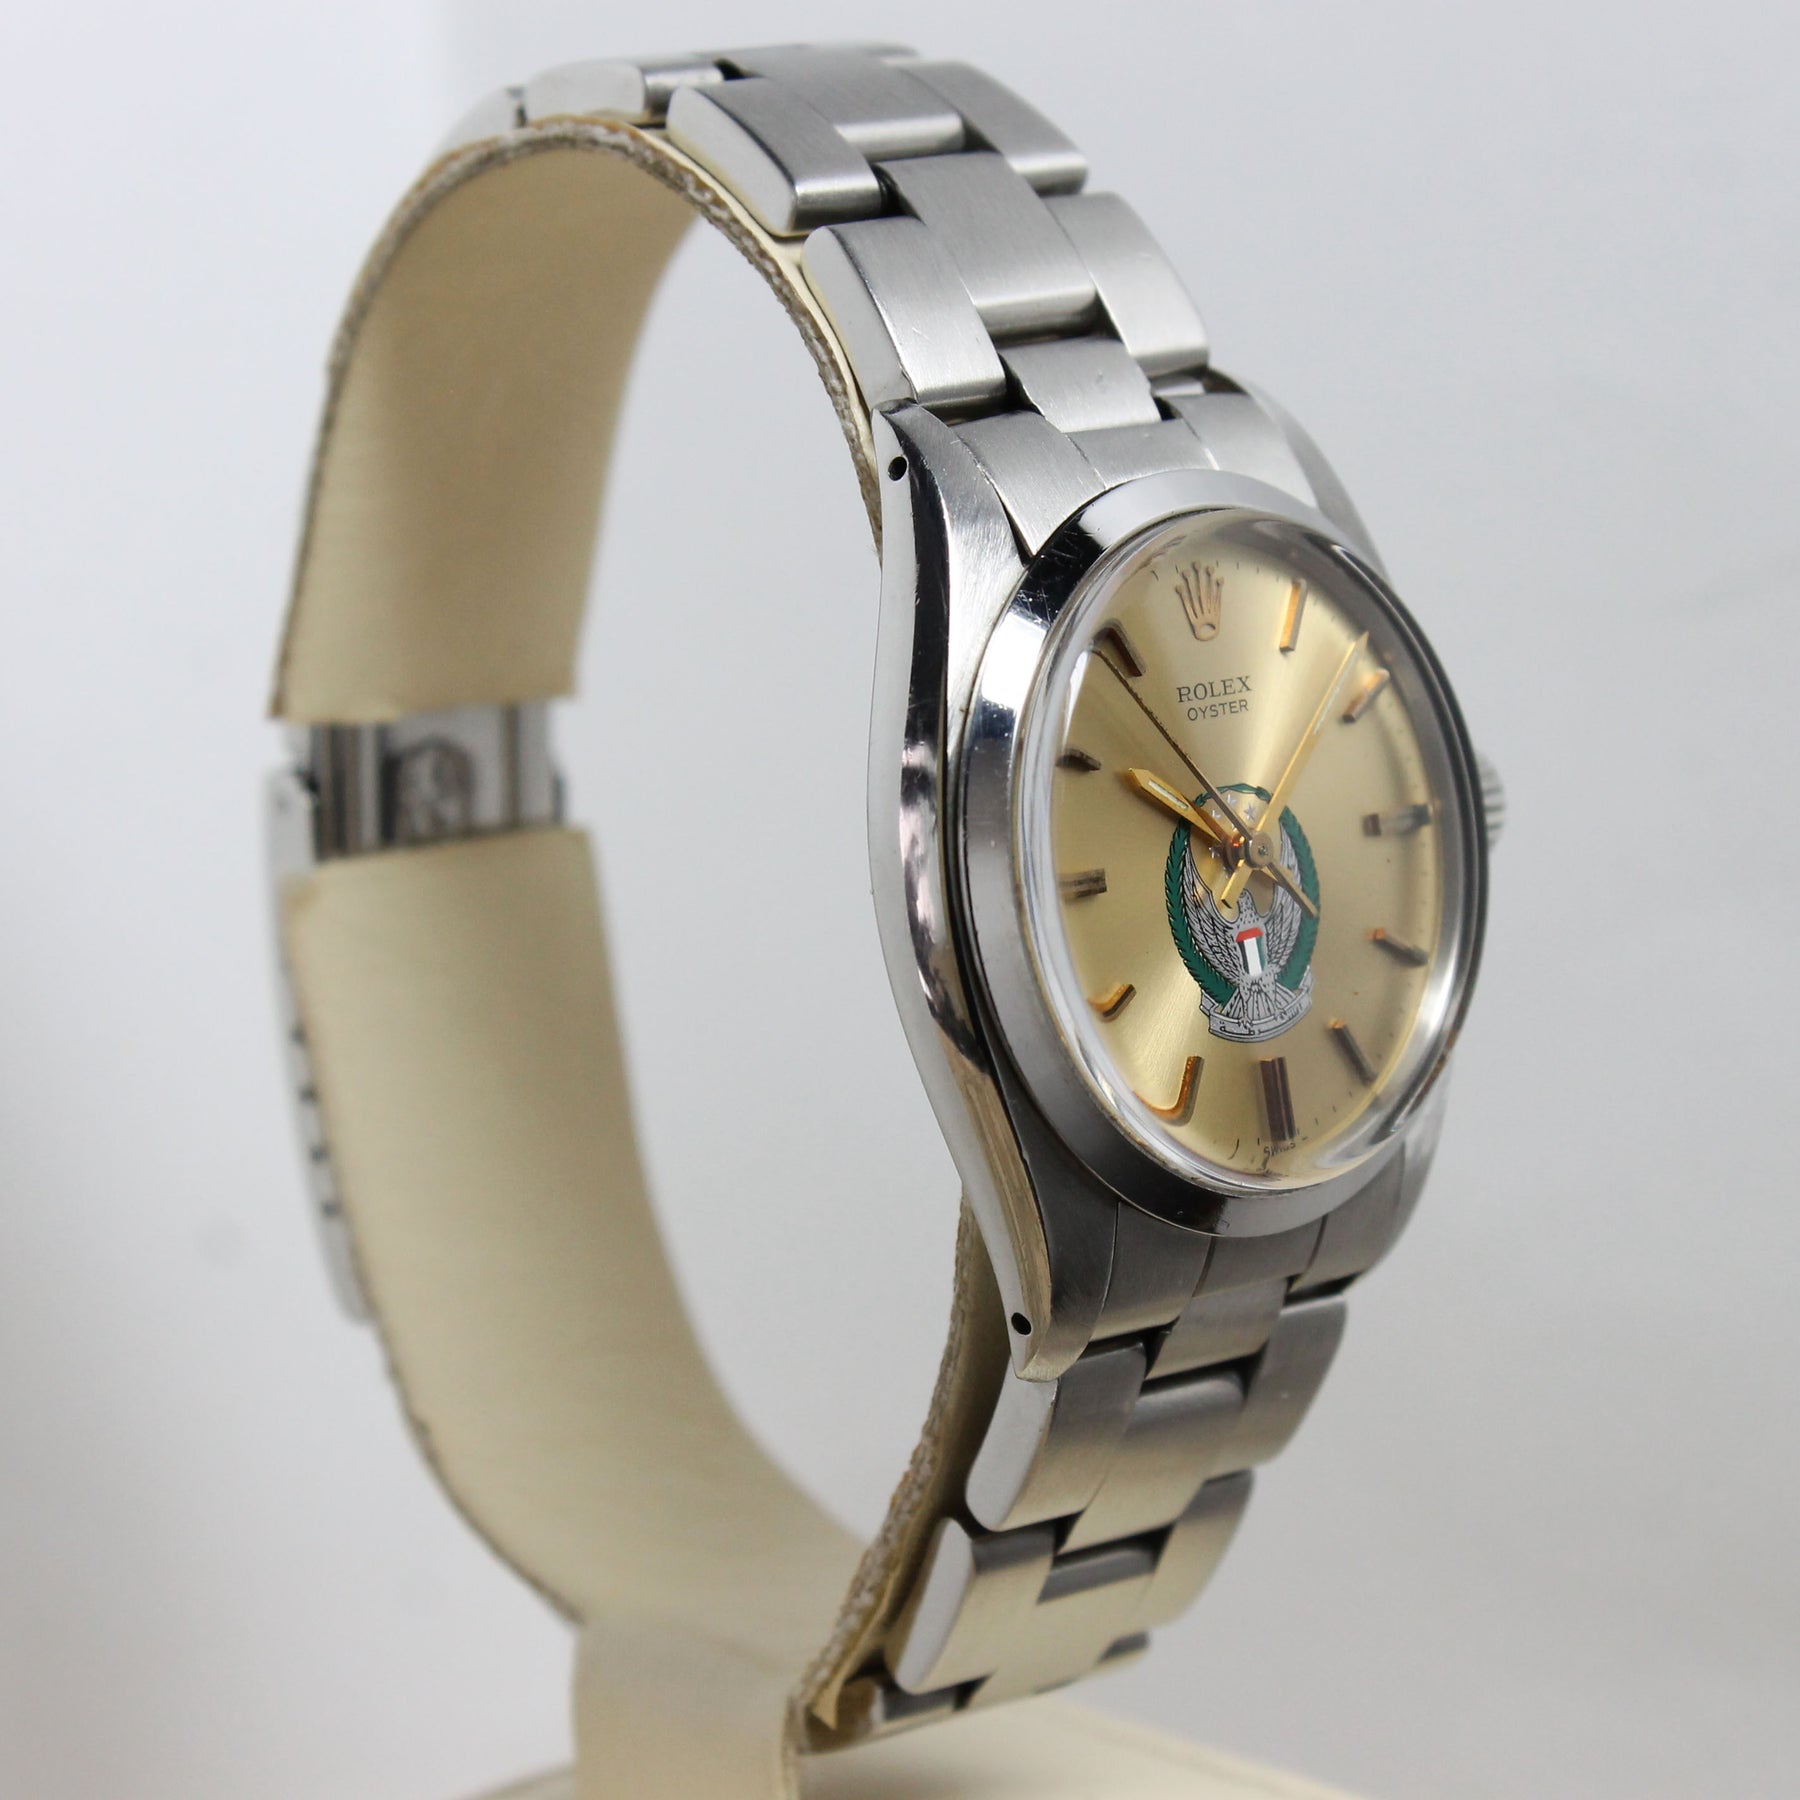 Rolex Oyster Precision UAE Armed Forces Ref. 6426 Year 1974